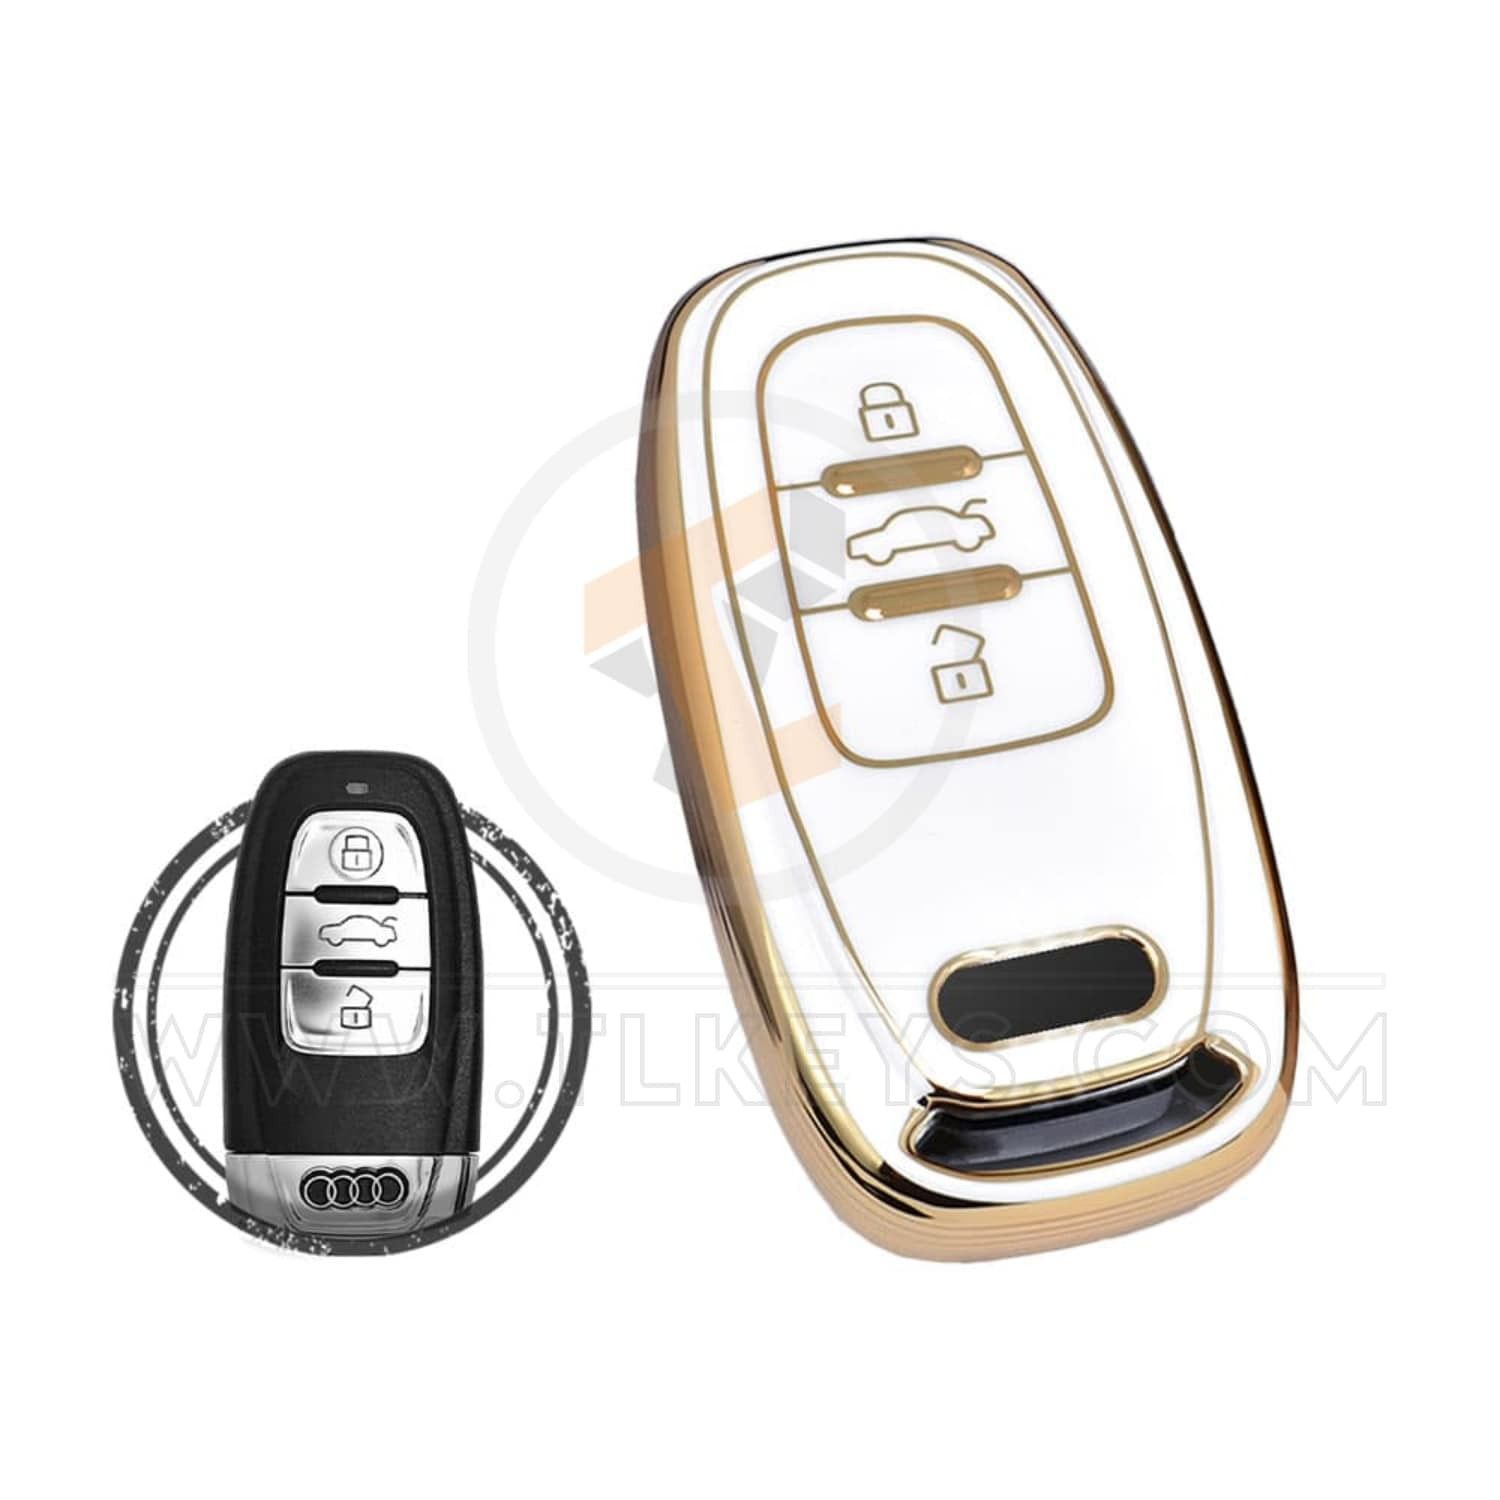 TPU Car Key Cover Case Compatible With Audi Smart Status Aftermarket